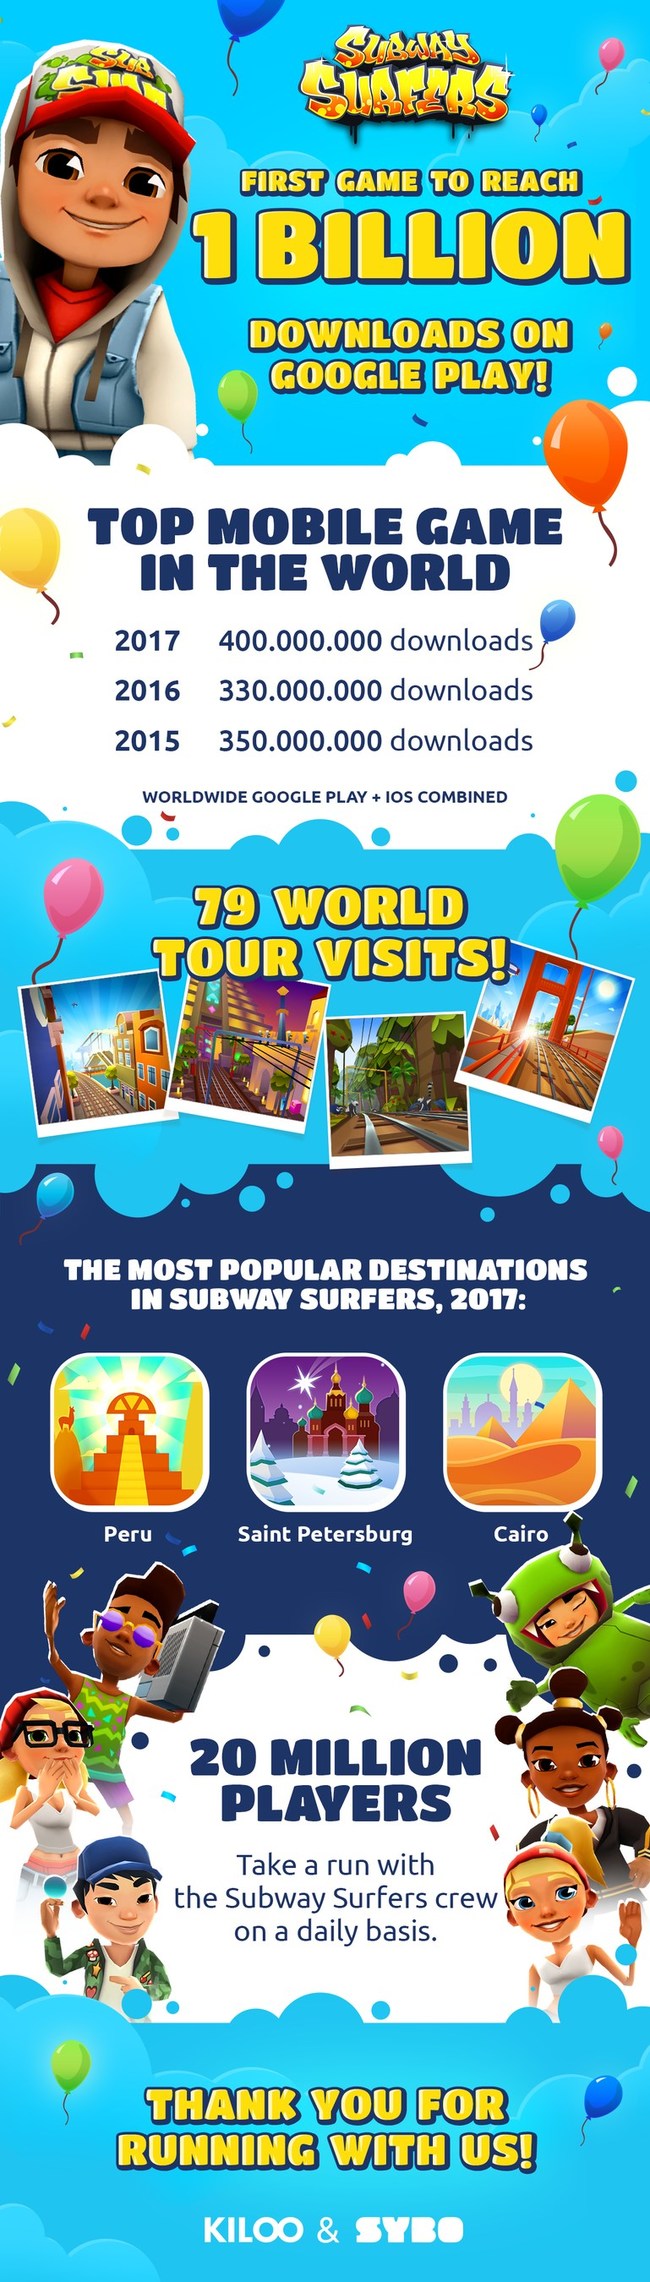 Subway Surfers, the endless runner phenomenon, has been downloaded more than 1 billion times on Google Play.